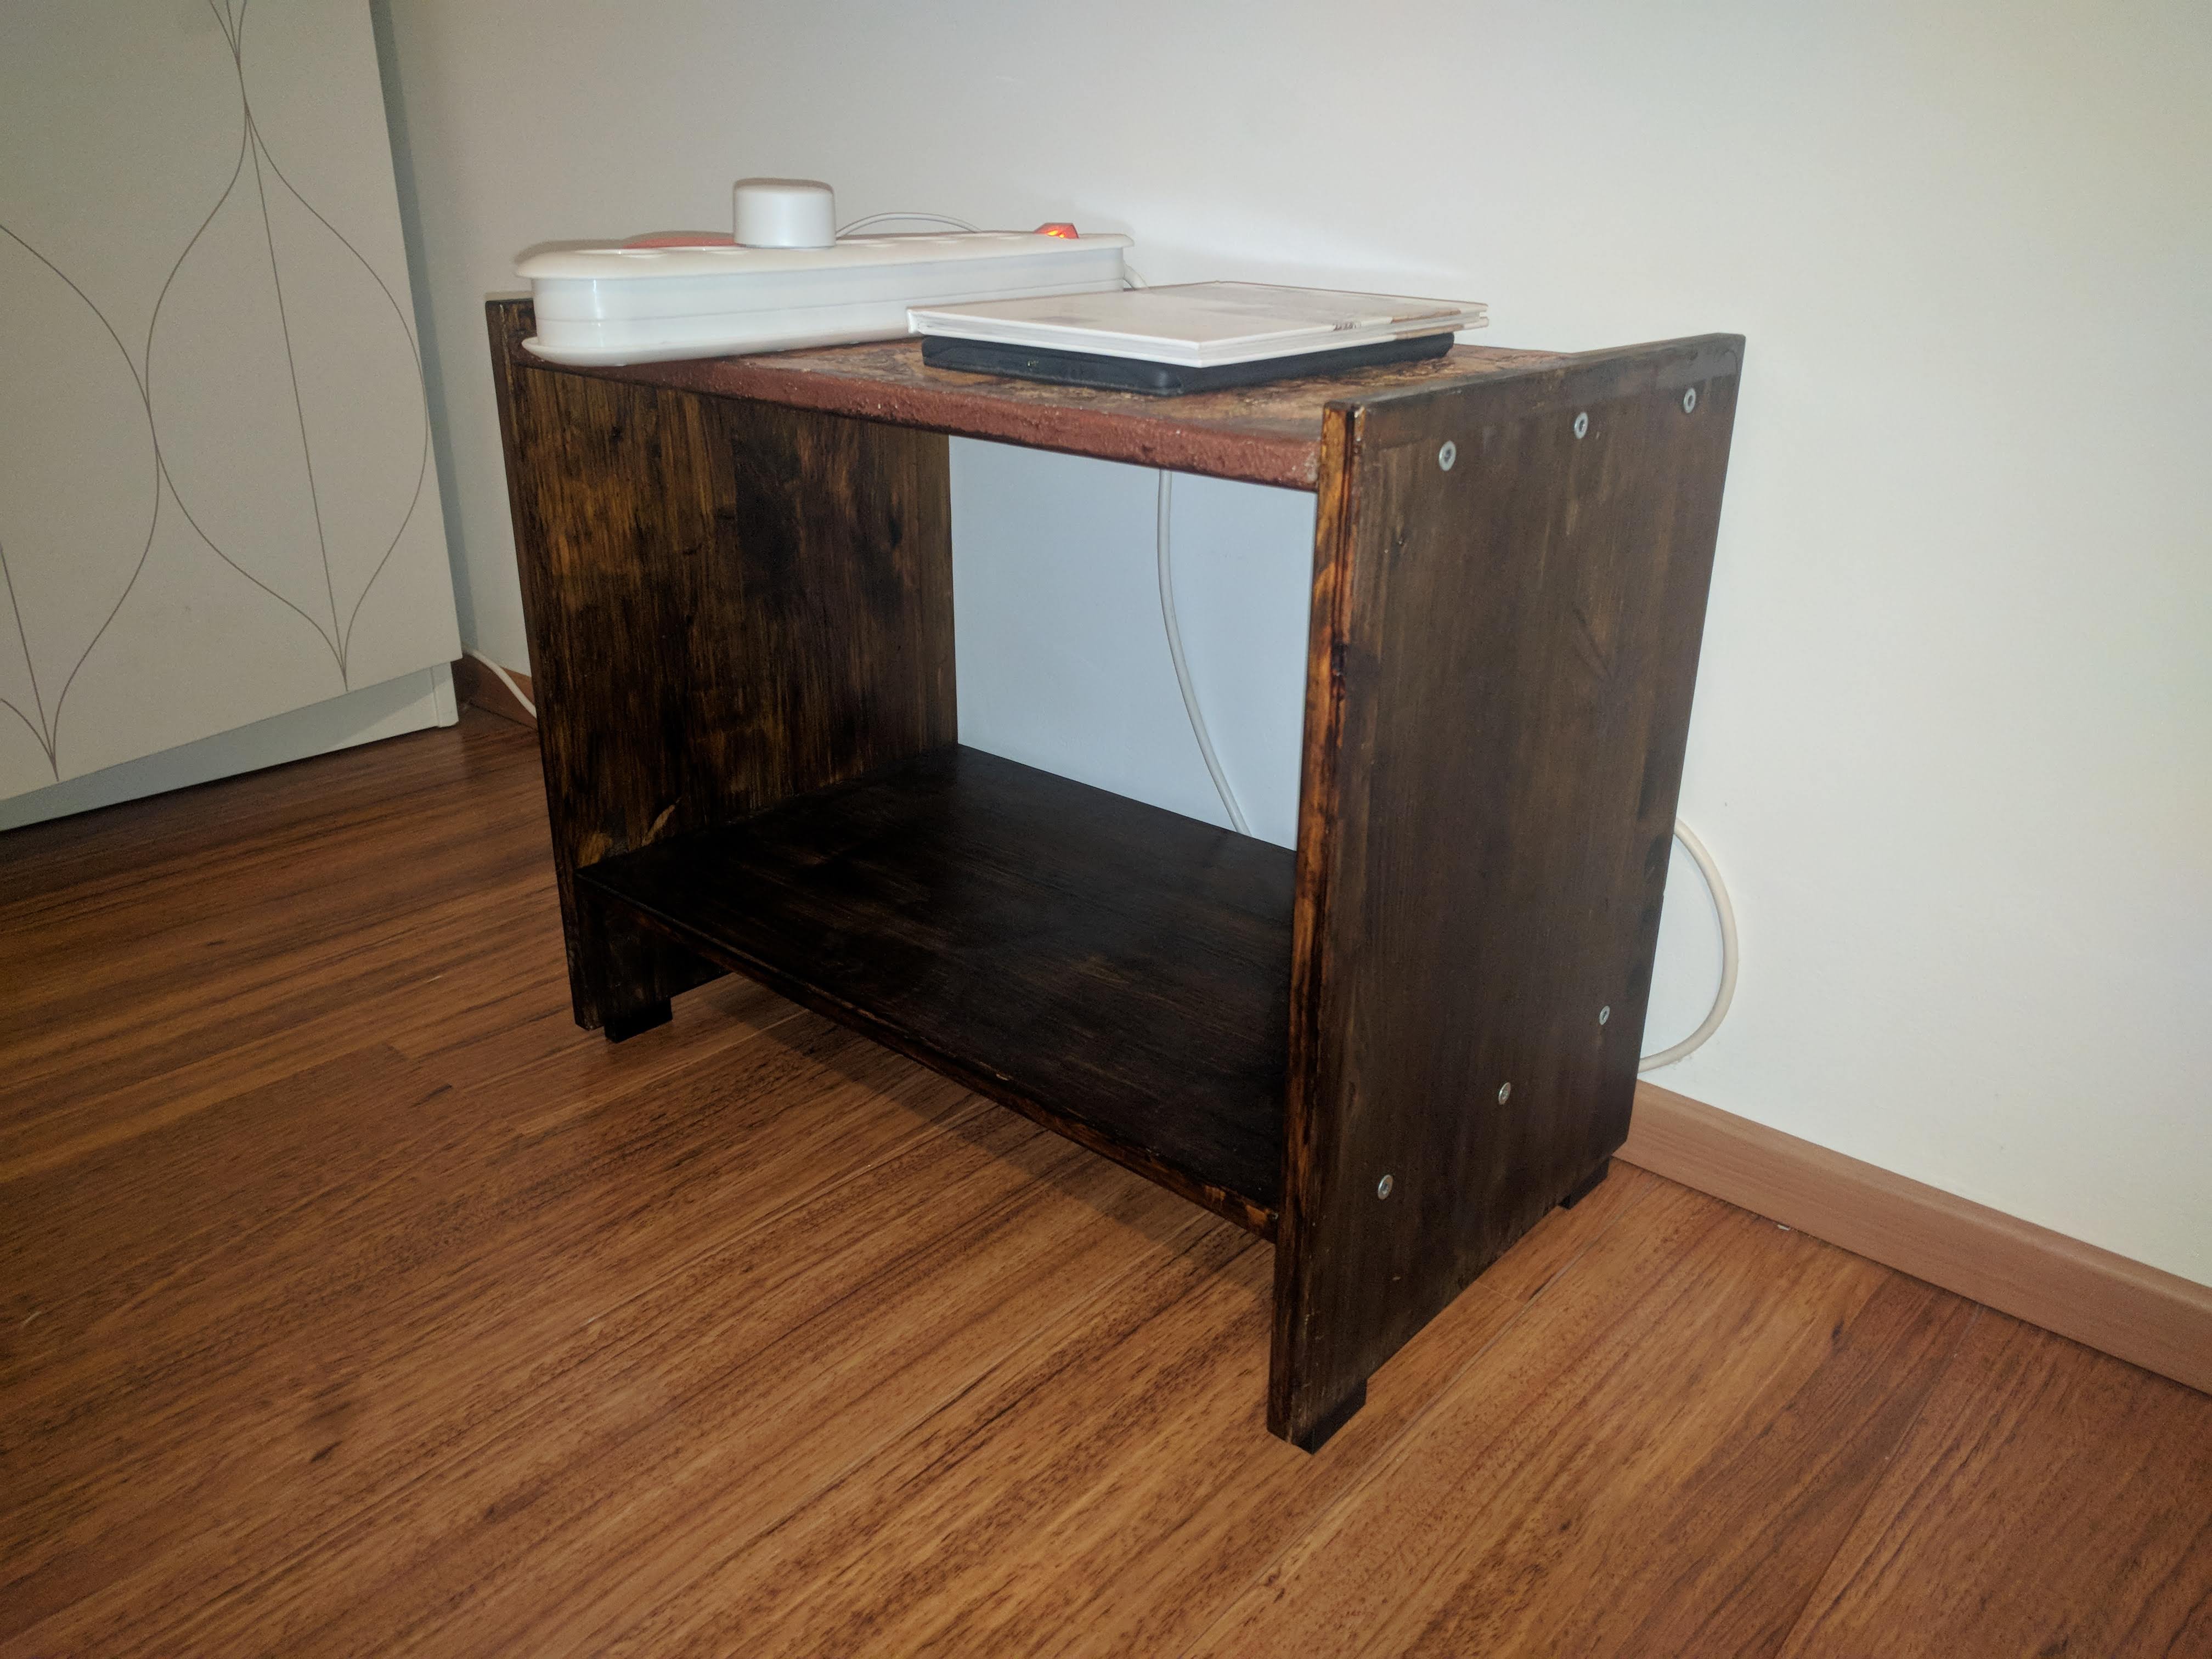 Nightstand with legs installed